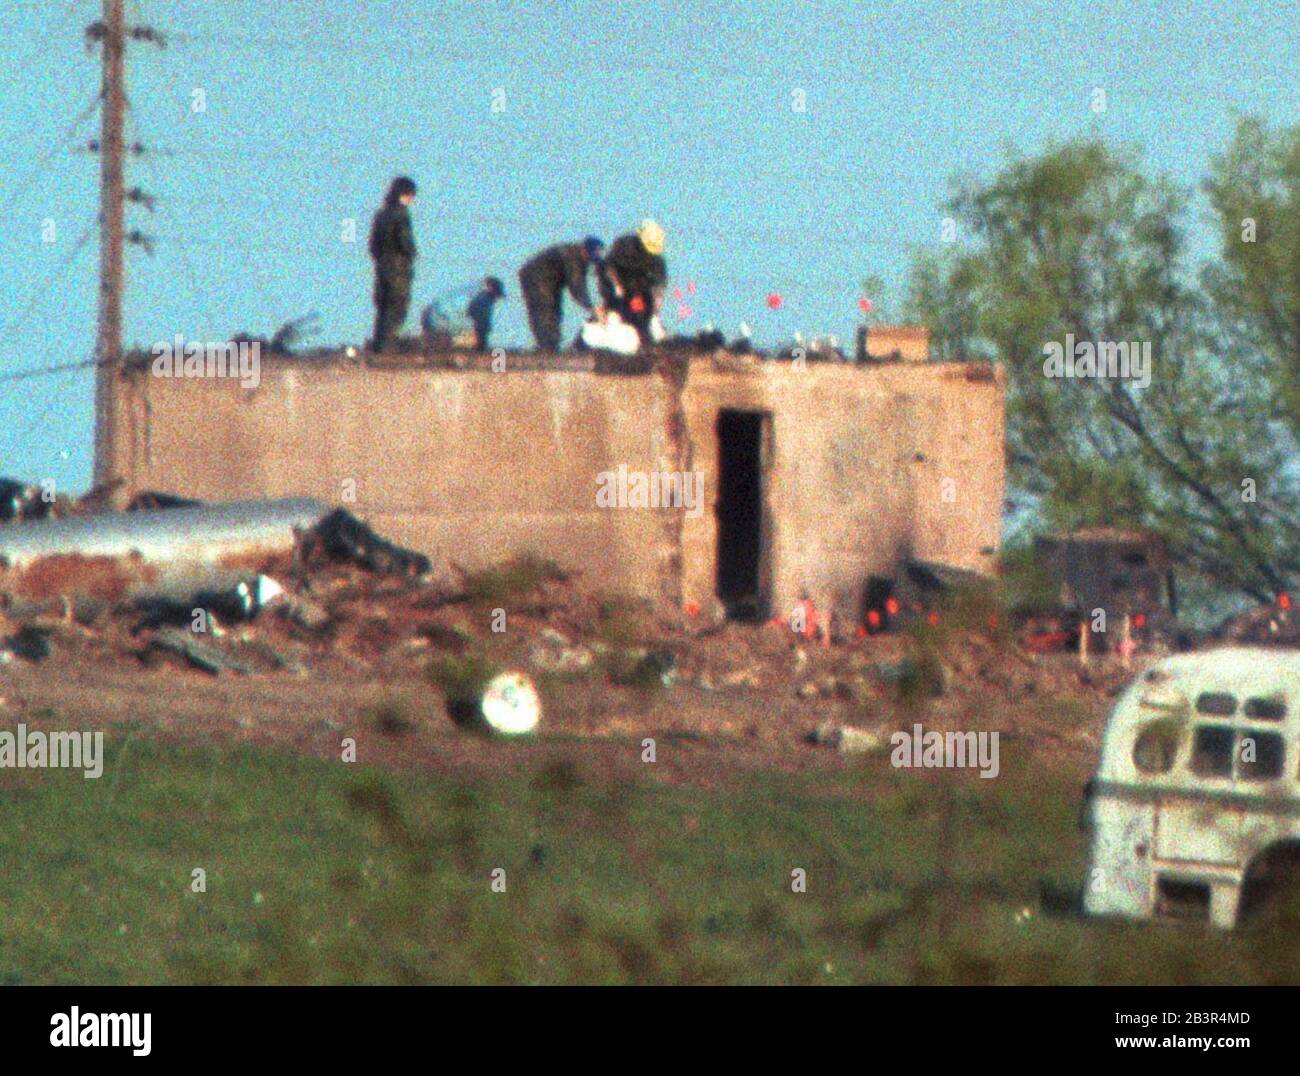 Waco Texas USA, 23APR1993: Federal agents fill body bags on top of the burned-out ammunition bunker at the Branch Davidians' Mount Carmel Center property after the religious sect's compound burned four days earlier. The fire killed 76 members of the group and ended a 51-day siege between the group and federal law enforcement agents near Waco. ©Bob Daemmrich Stock Photo